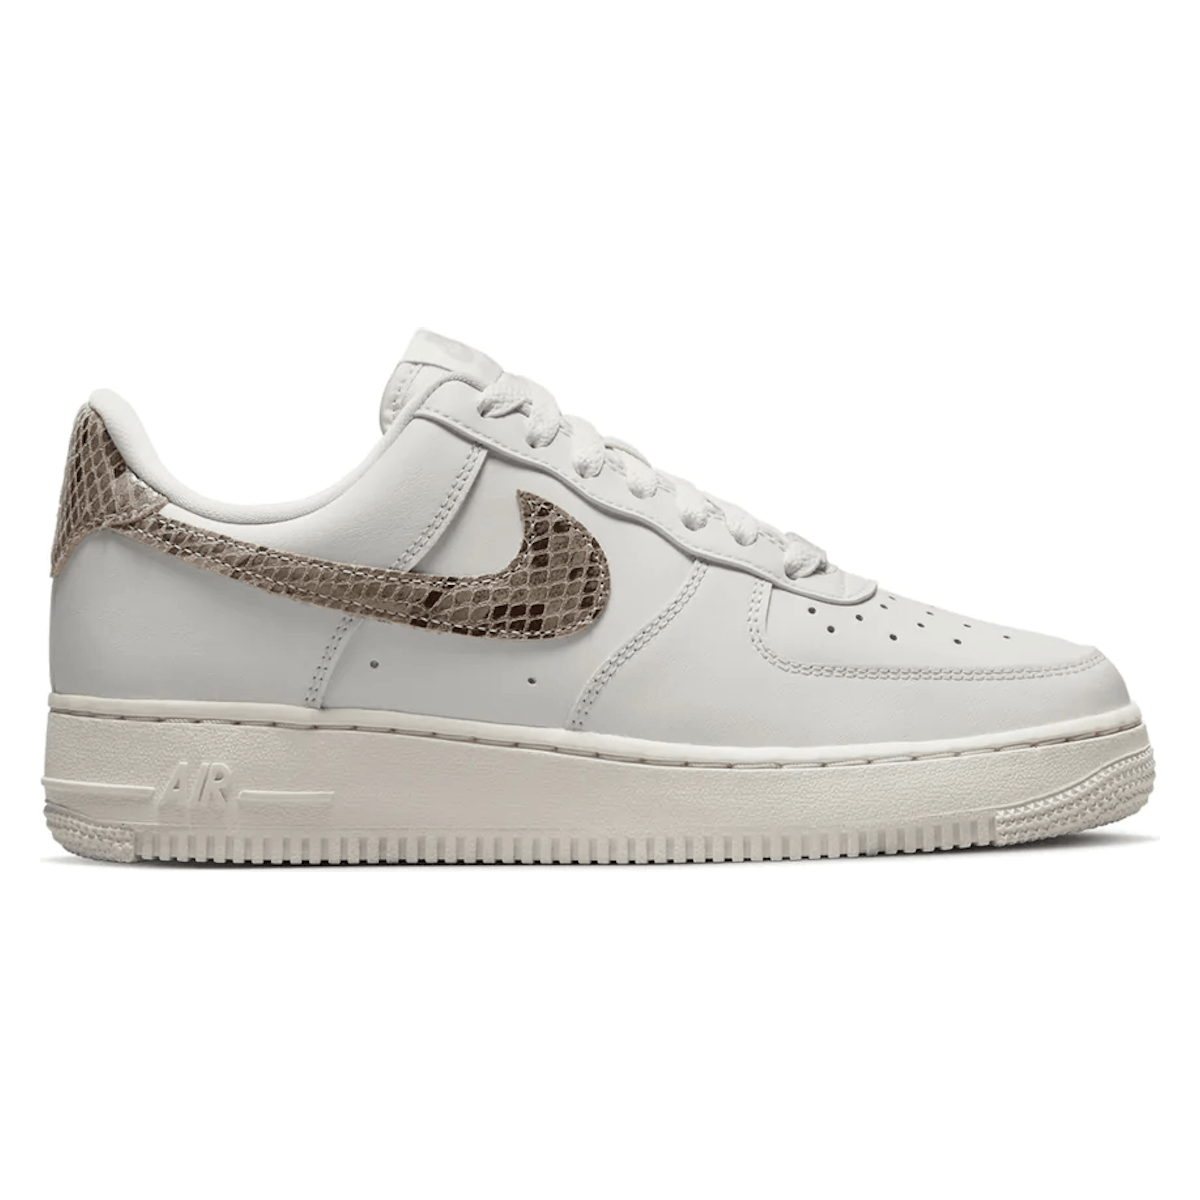 Nike Air Force 1 '07 Wmns "Snakeskin"